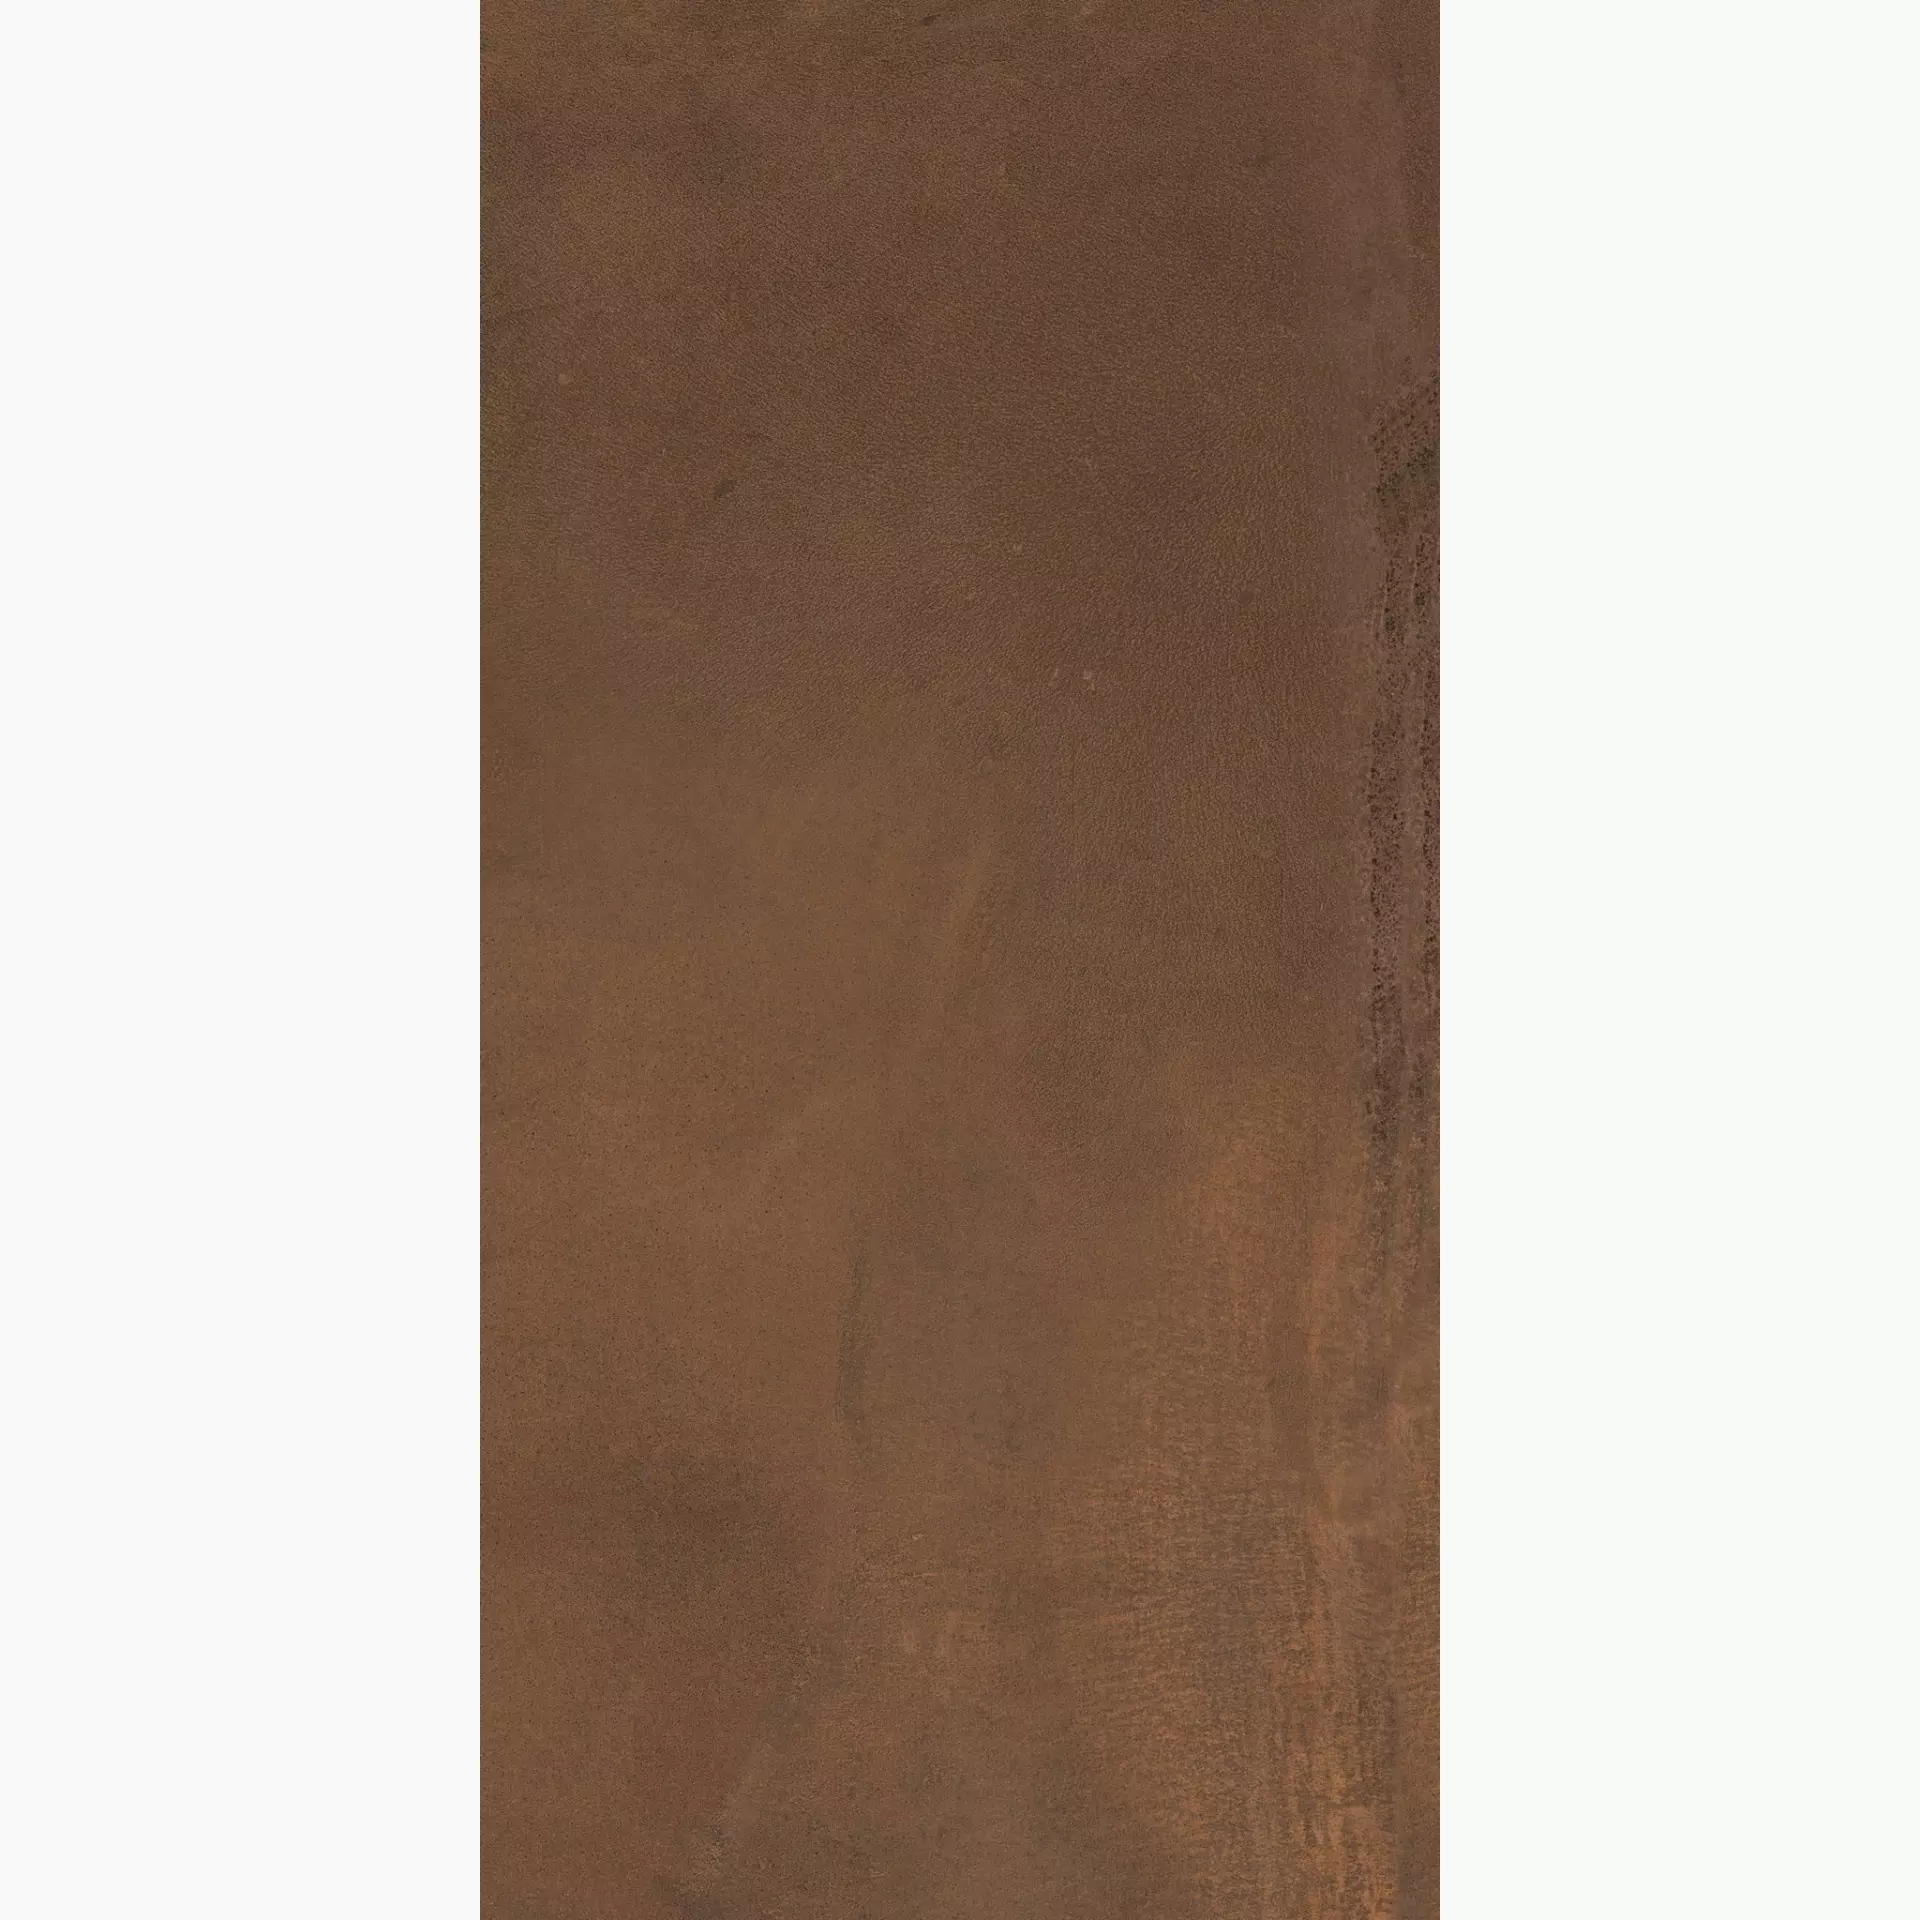 ABK Interno9 Rust Naturale I9R03300 30x60cm rectified 8,5mm